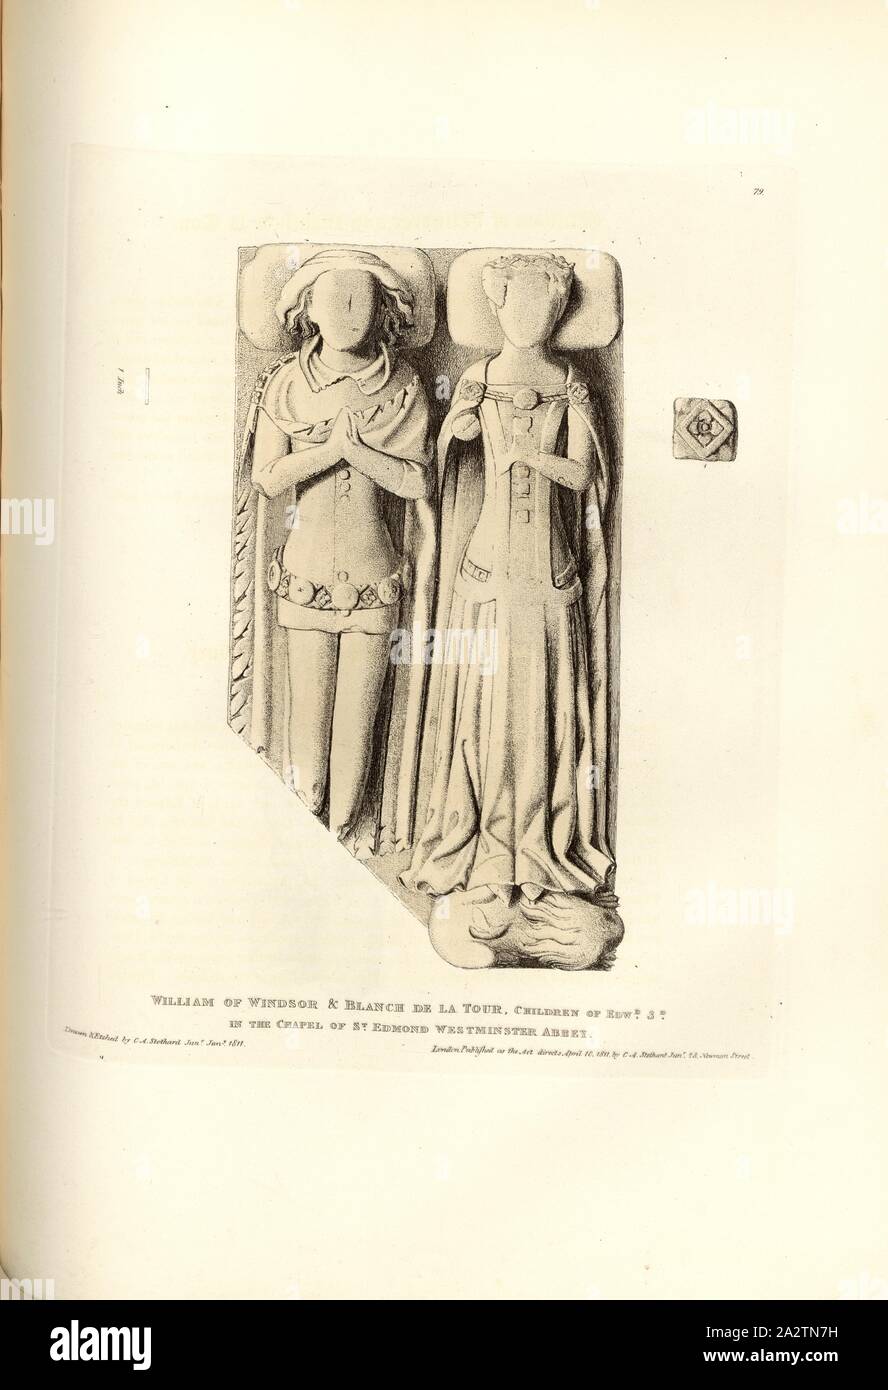 William of Windsor, Tomb of Blanche de la Tour and William of Windsor at Westminster Abbey, signed: Drawn & Etched by C.A. Stothard Jun, Published by C.A. Stothard Jun, Fig. 88, 79, after p. 60, Stothard, Charles Alfred Jun. (drawn, etched and publ.), Charles Alfred Stothard, Alfred John Kempe: The monumental effigies of Great Britain: selected from our cathedrals and churches, for the purpose of bringing together, and preserving correct representations of the best historical illustrations extant, from the Norman conquest to the reign of Henry the Eighth: dedicated by permission to the Prince Stock Photo